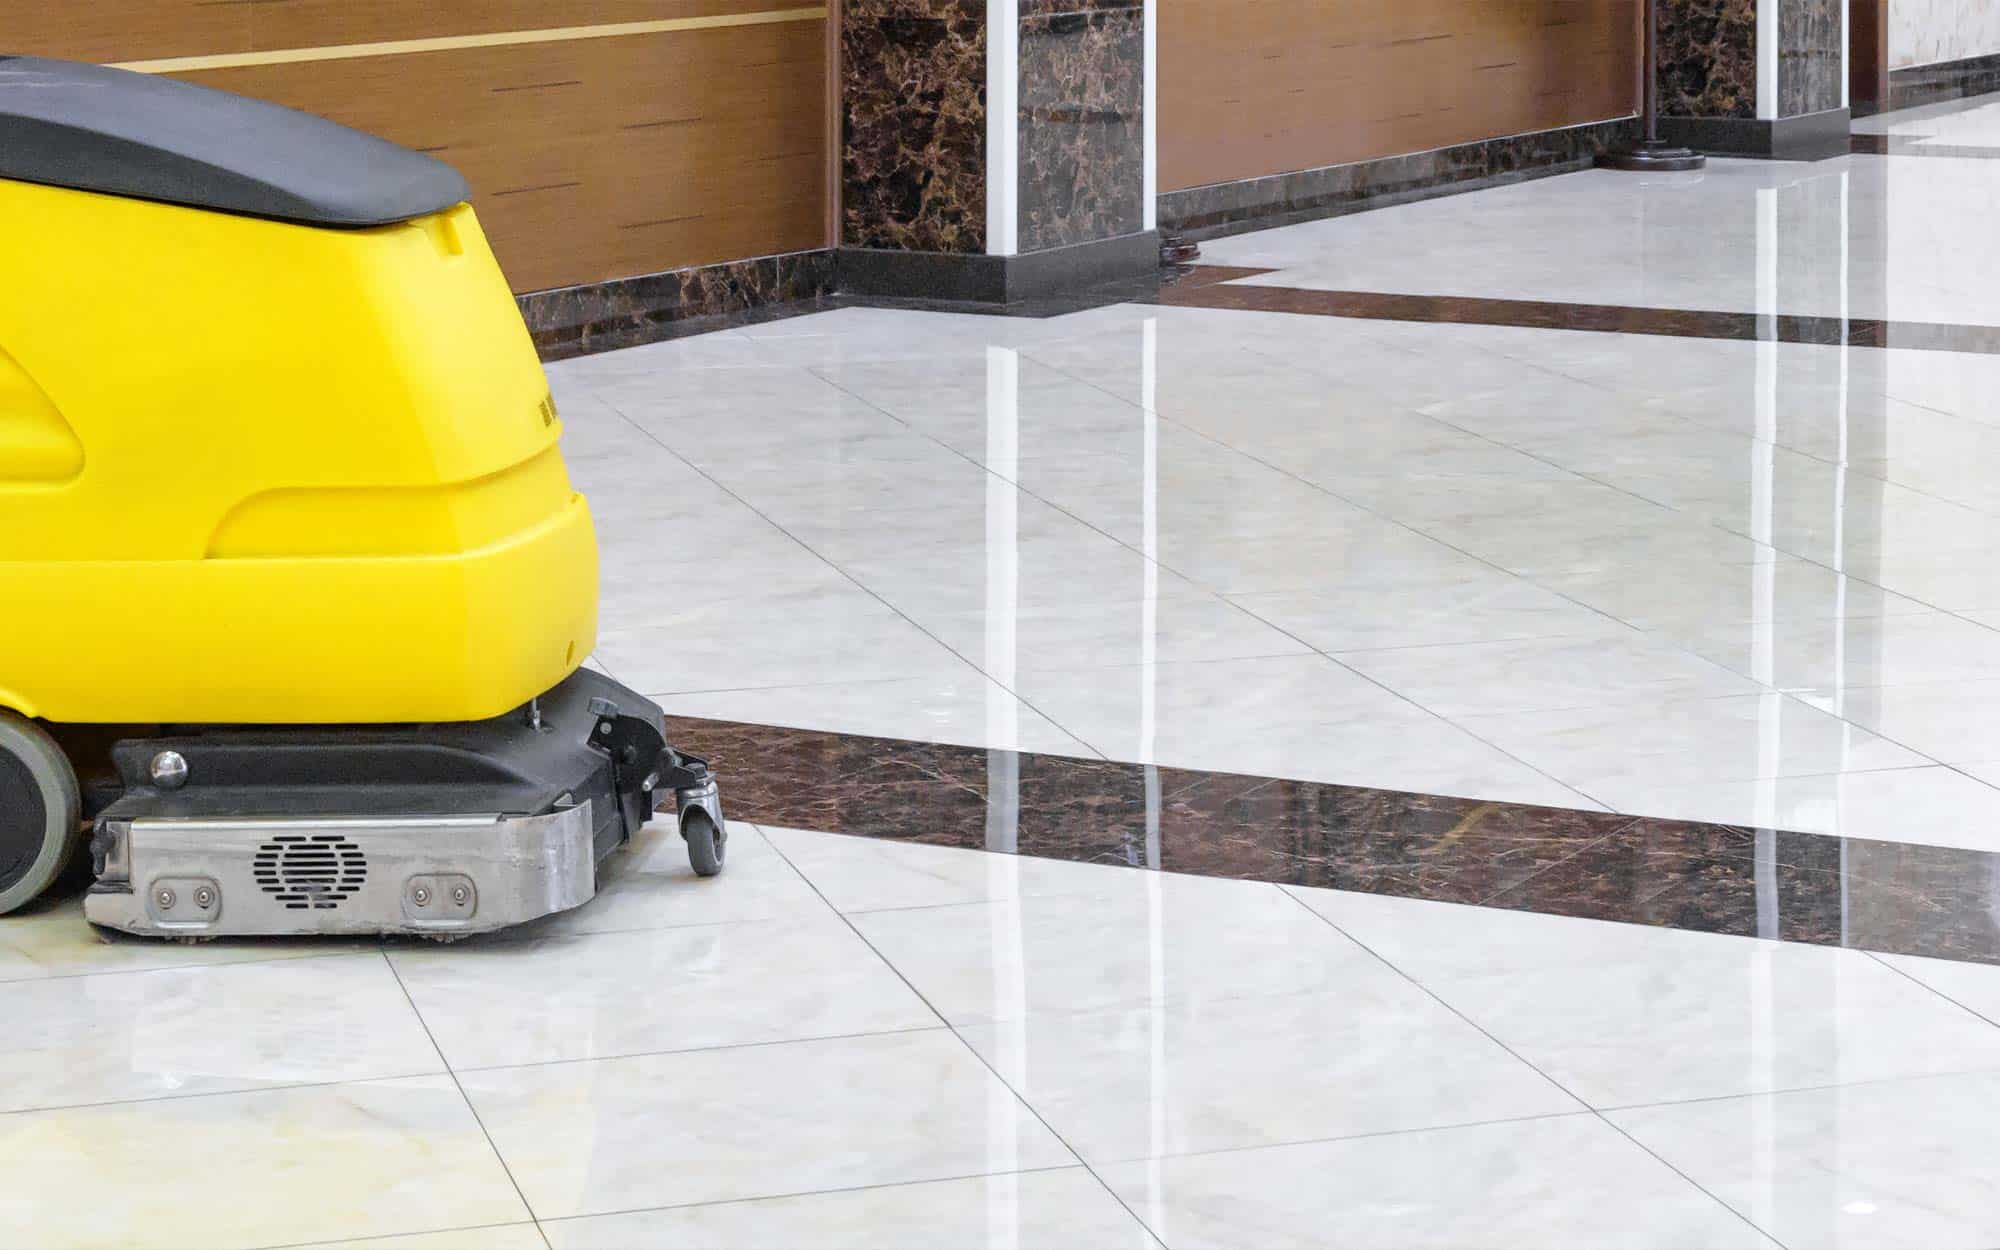 Cleaning machine on marble floor in office